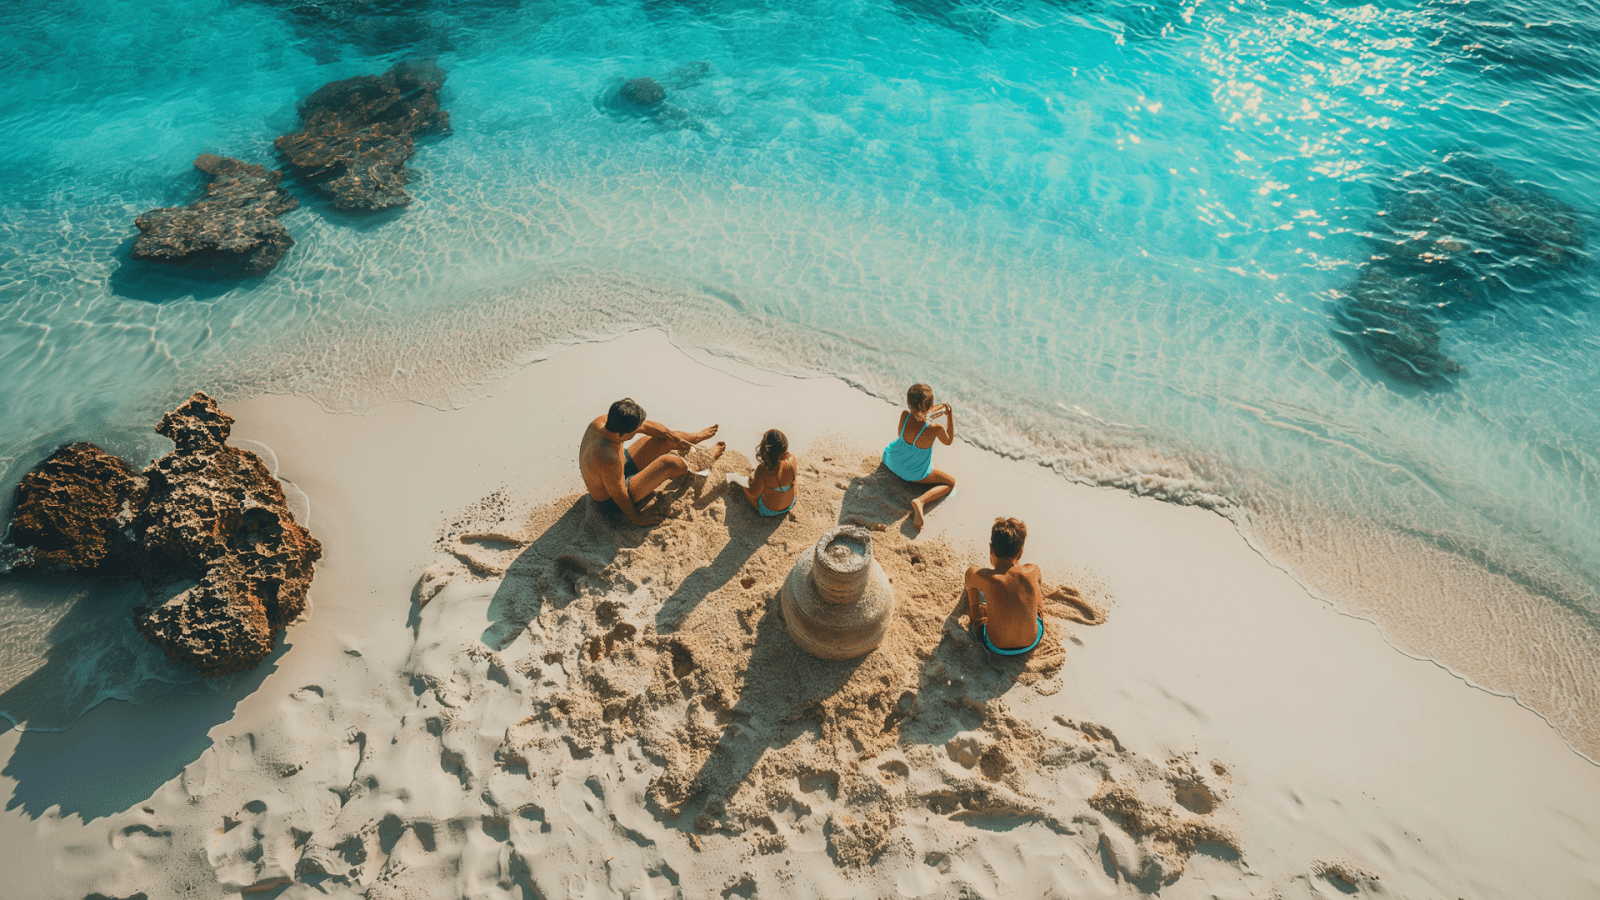 Family building a sandcastle and enjoying the clear turquoise waters of beaches in the Maldives.